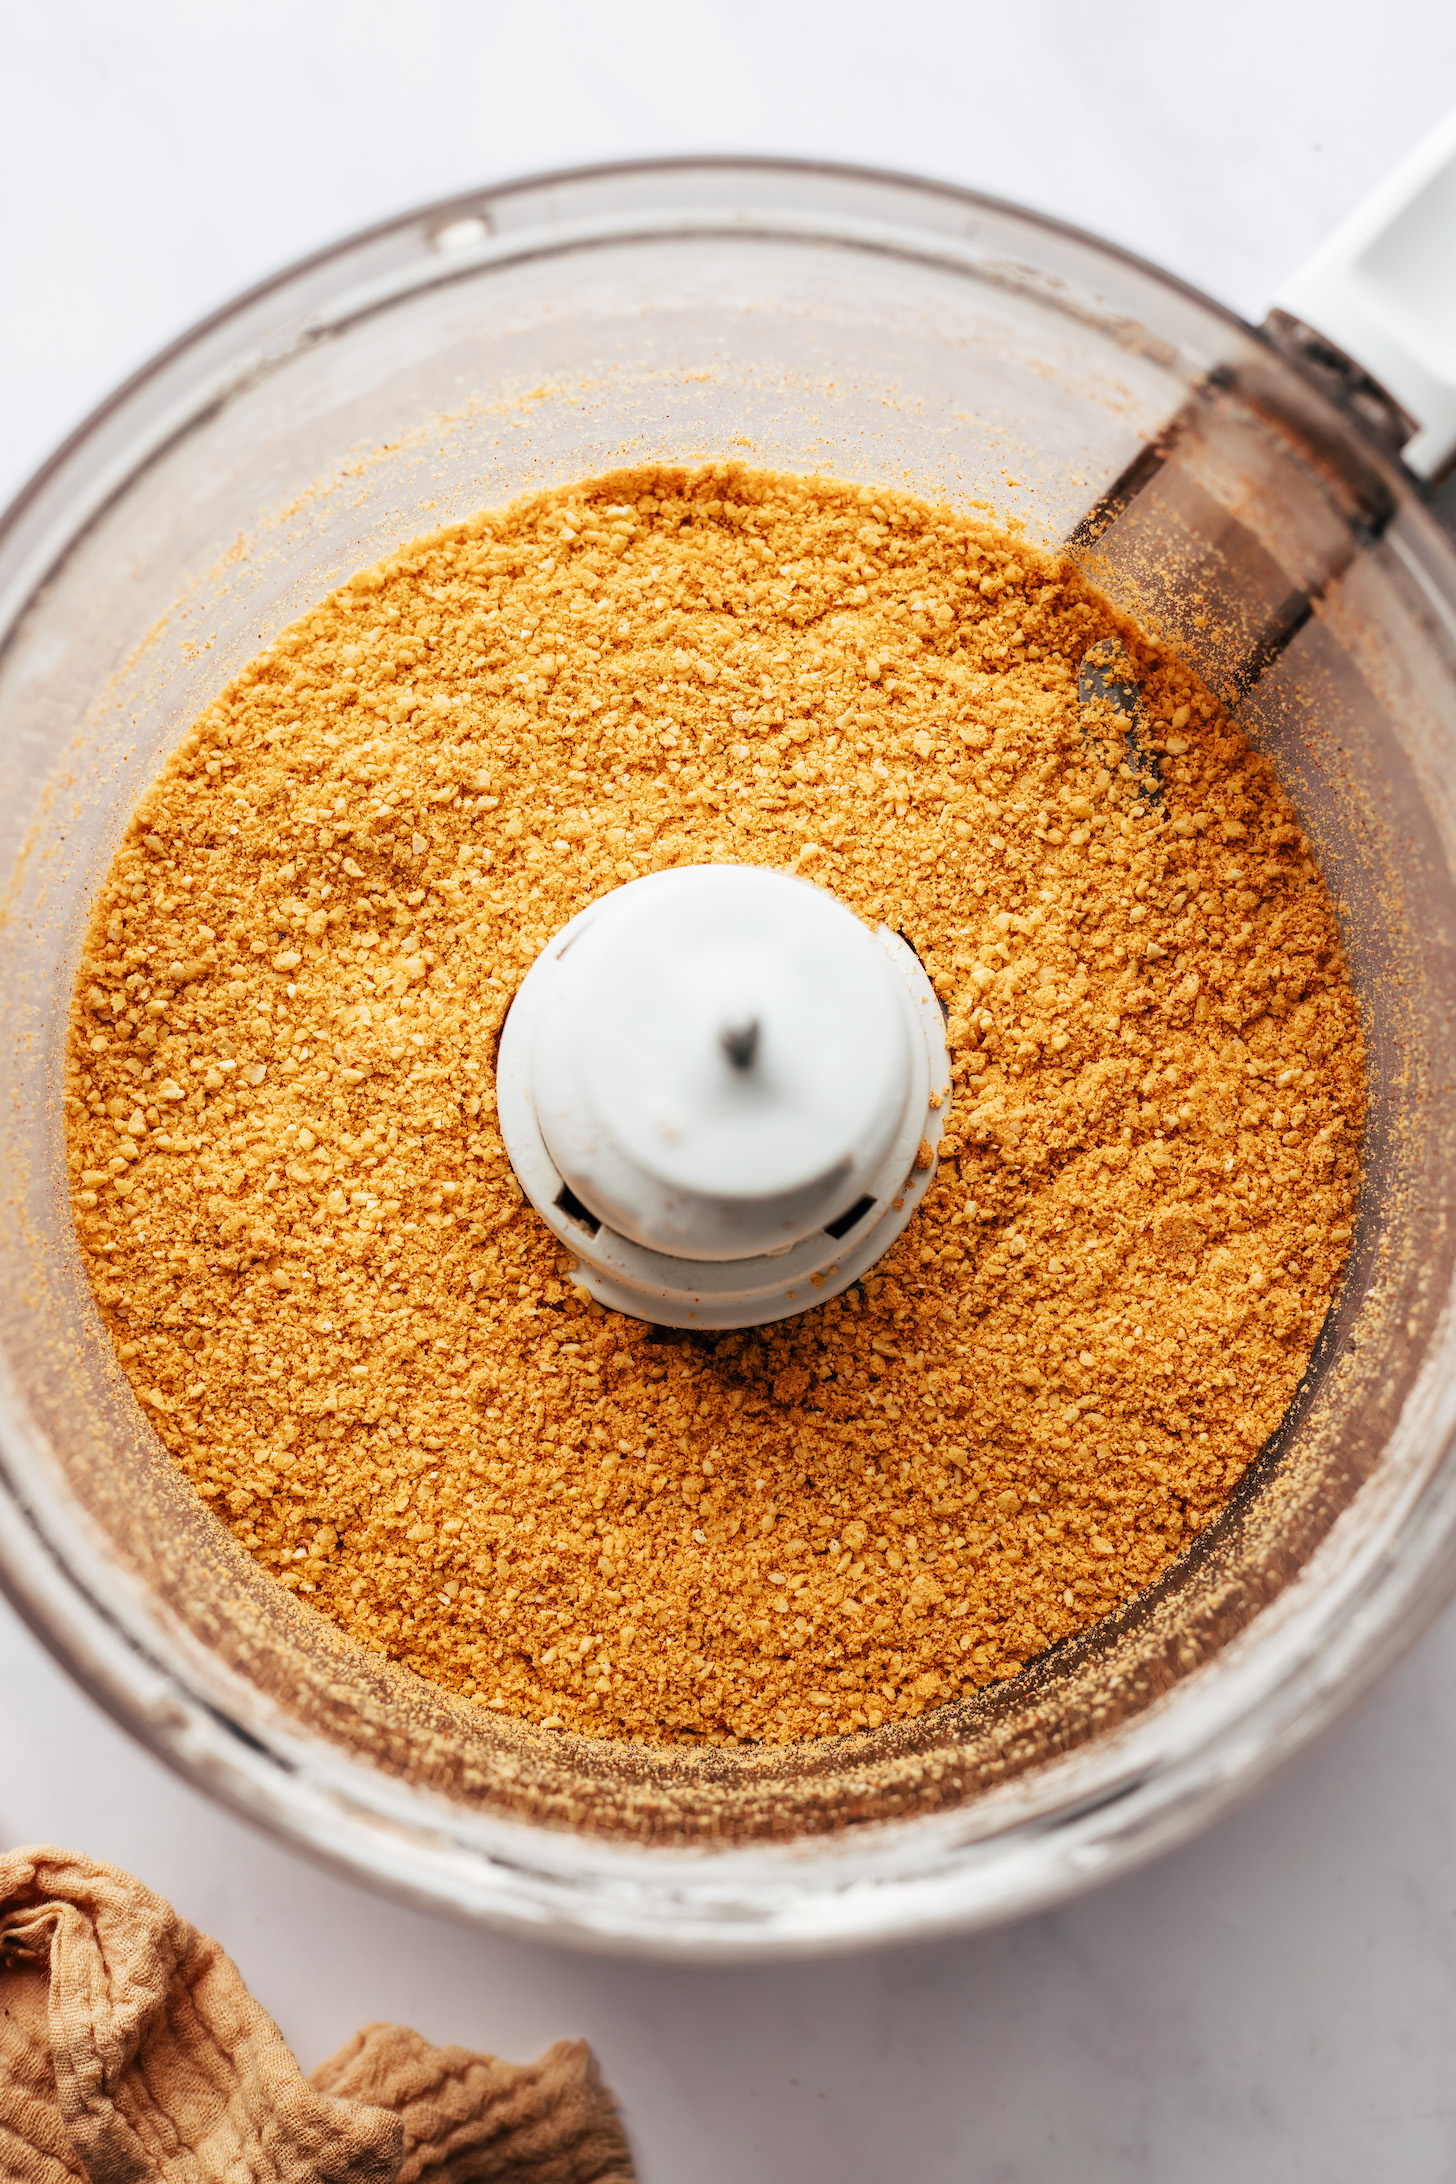 Cheesy cashew mixture in a food processor